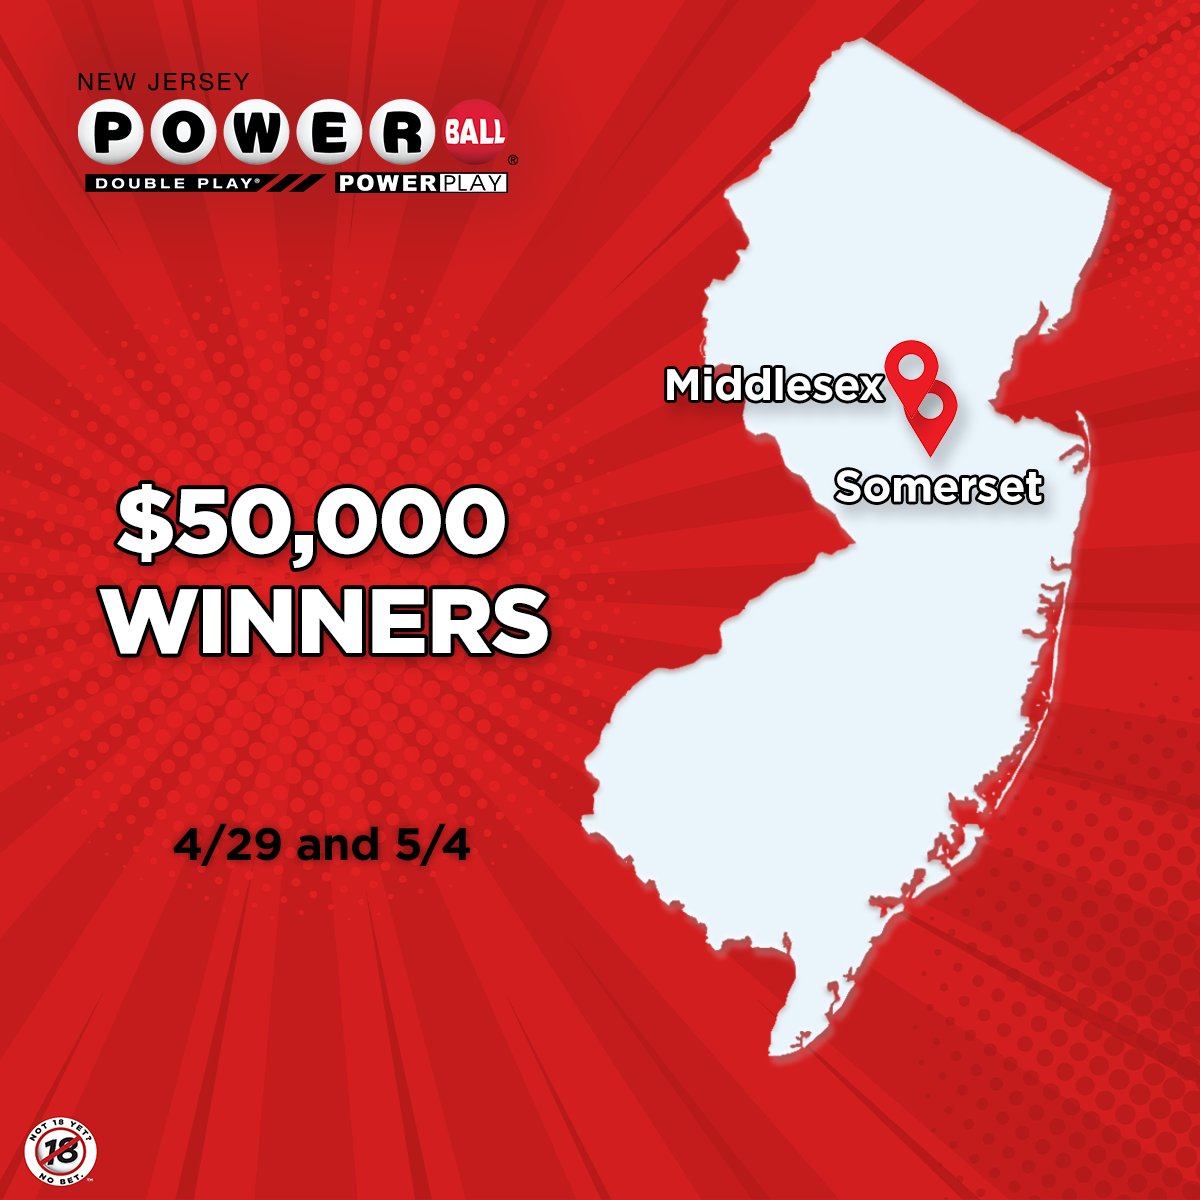 Congrats to these two lucky #Powerball players who both won $50,000 last week! You have a chance to win it all if you get your ticket for Wednesday’s $20,000,000 drawing! For Powerball game odds, visit NJLottery.com/Powerball. #AnythingCanHappenInJersey